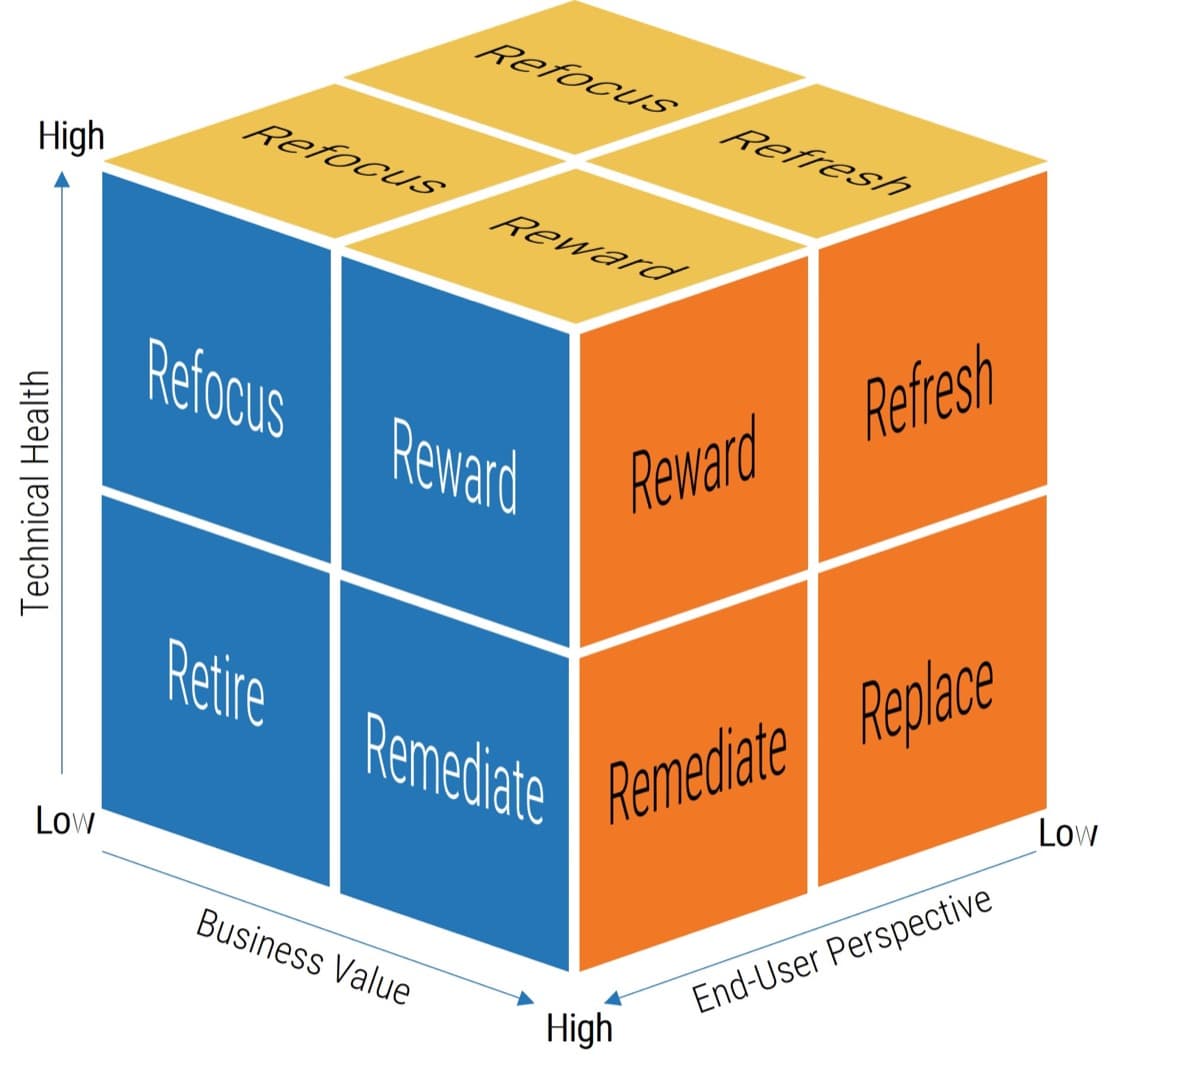 The image contains a screenshot of Info-Tech's 6 R's Rationalization Disposition Model.